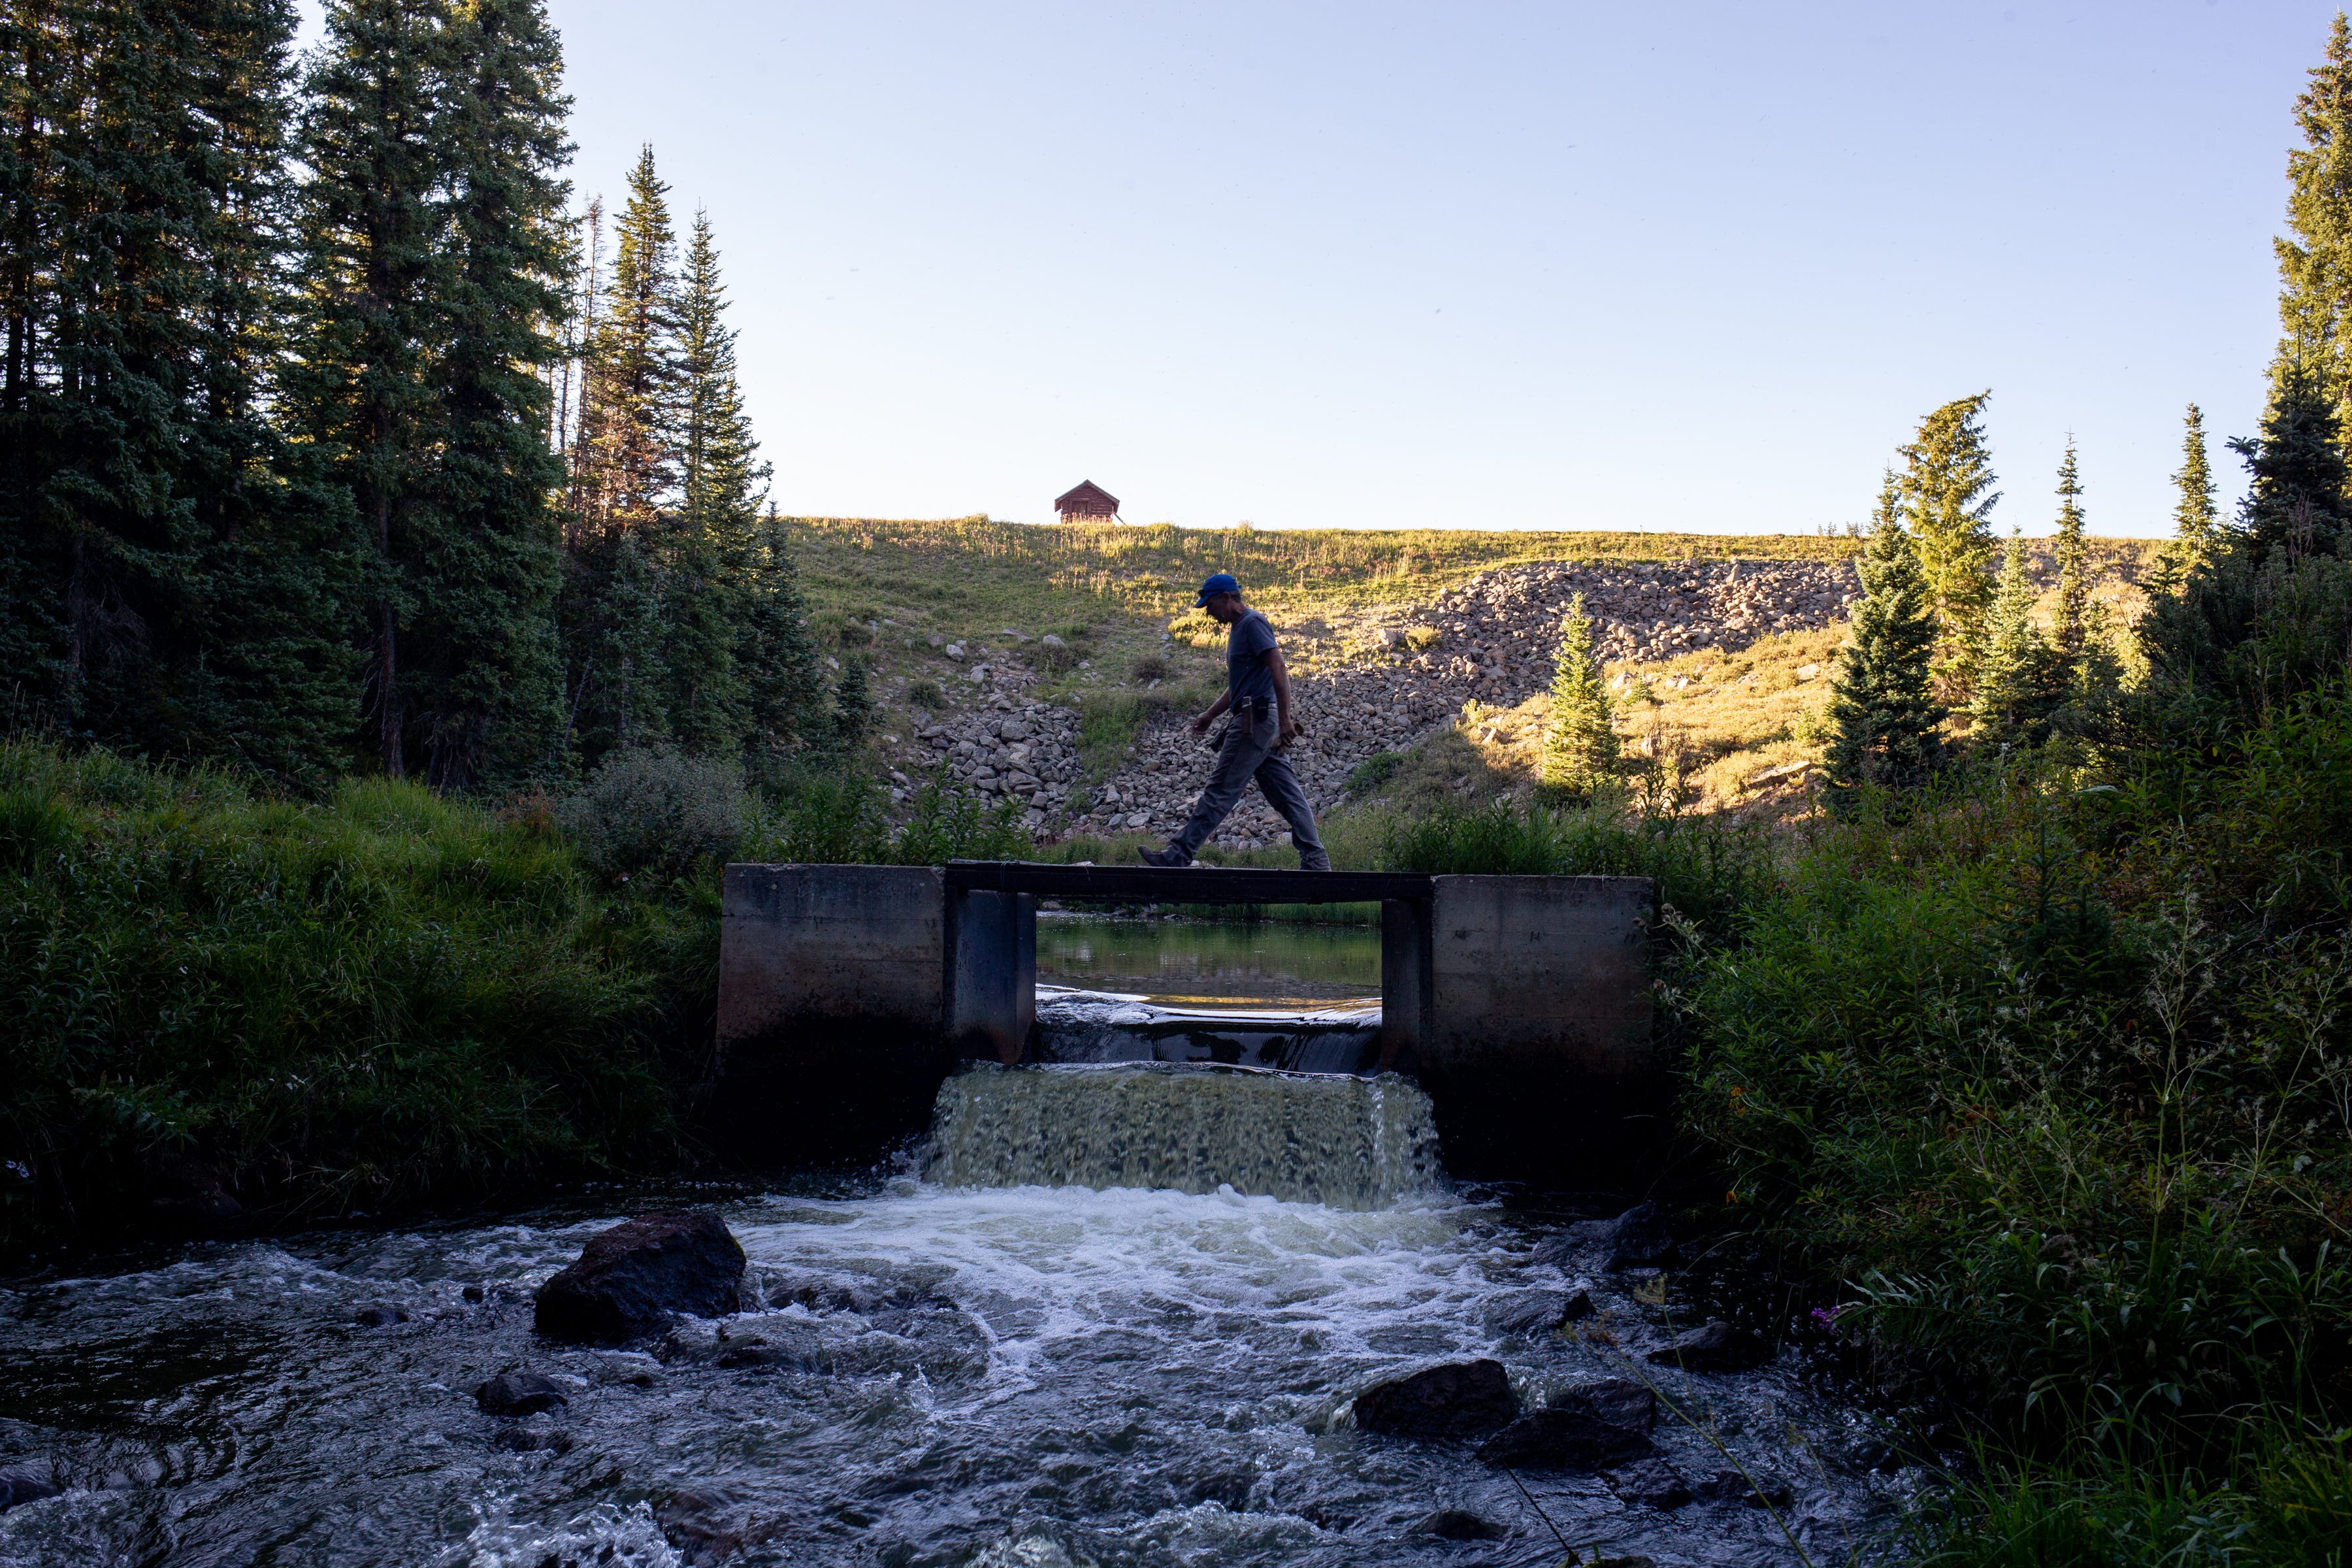 Water Commissioner John Walker walks across a 6-foot flume to get water flow measurements on Aug. 22, 2021, at Park Reservoir in the Grand Mesa National Forest in Colorado.